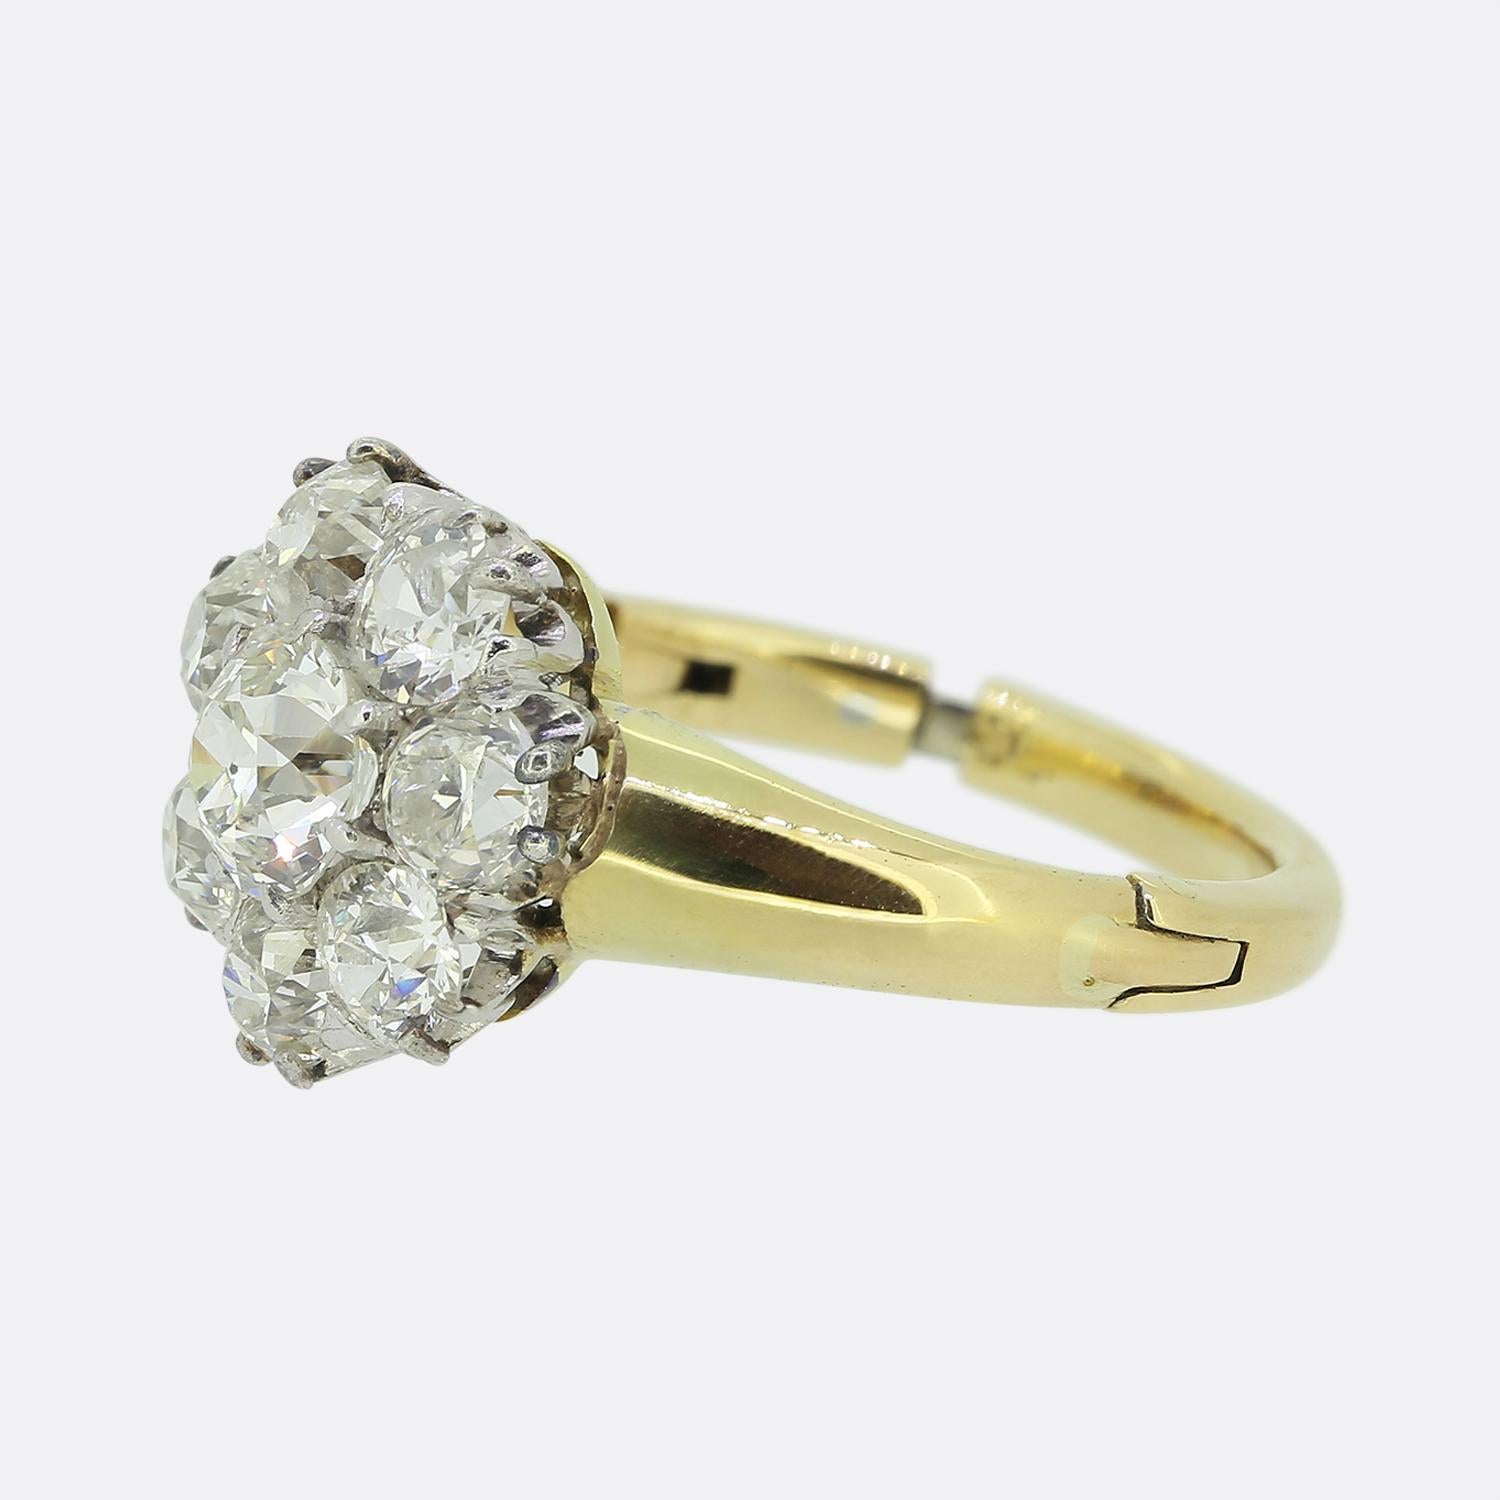 Here we have a delightful diamond cluster ring. This vintage ring has been crafted from 18ct yellow gold and features a single round faceted old mine cut diamond at the centre of the face. This principal stone sits slightly risen in a white gold